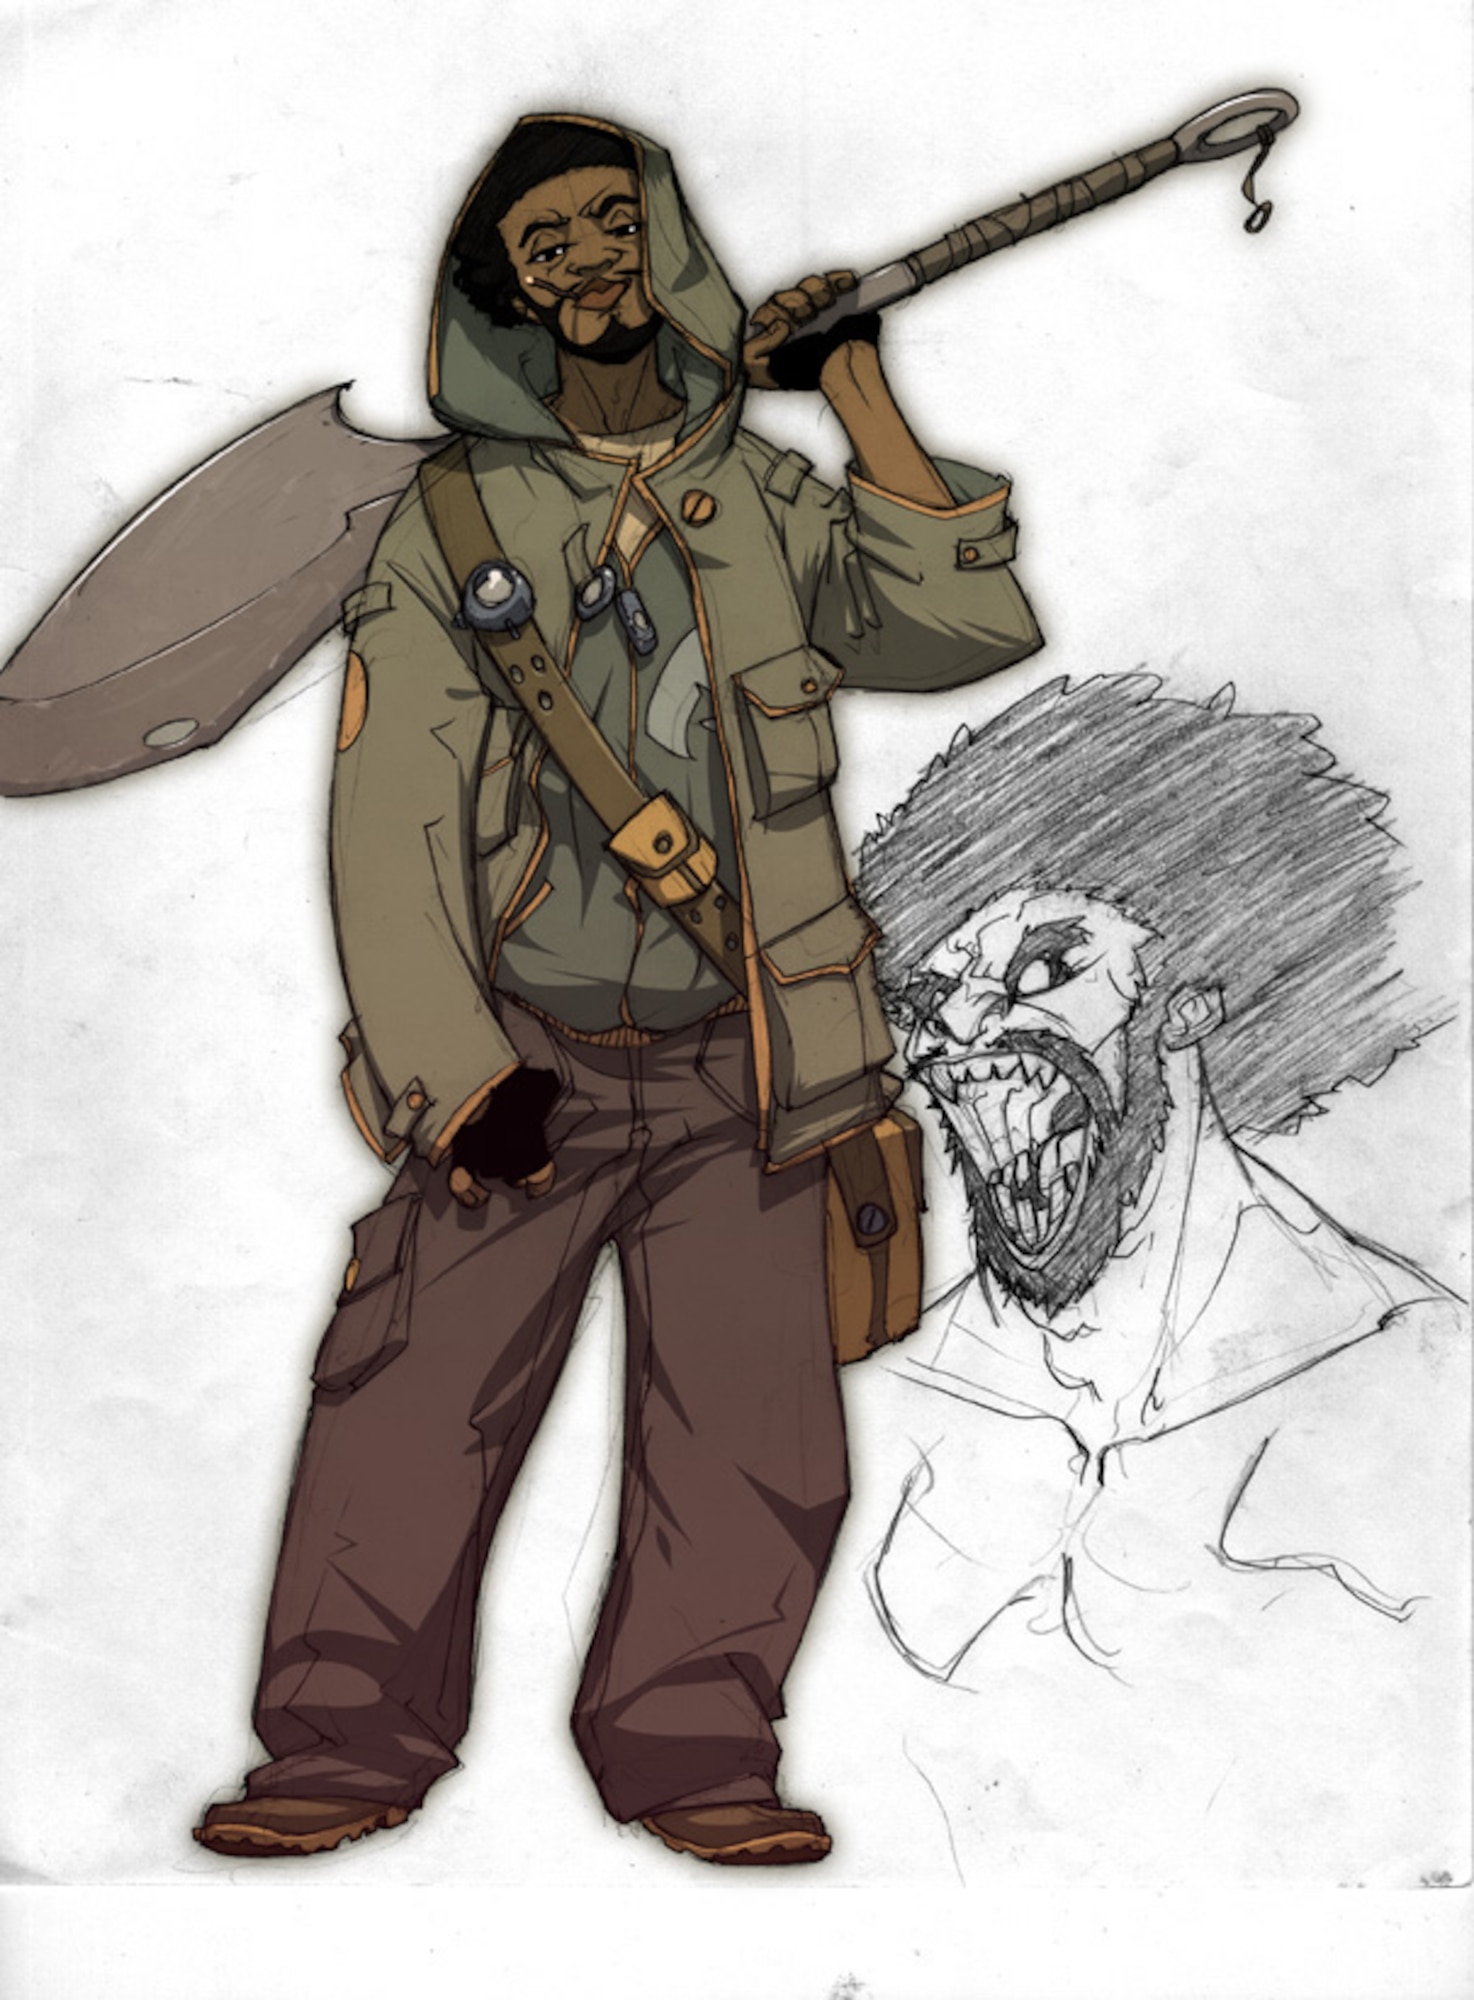 An illustration of Method Man's comic book character, Peerless Poe, in the "Method Man" comic. Method Man approached David Atchison to write the story for the comic book. (Illustration by Sanford Greene courtesy of David Atchison)